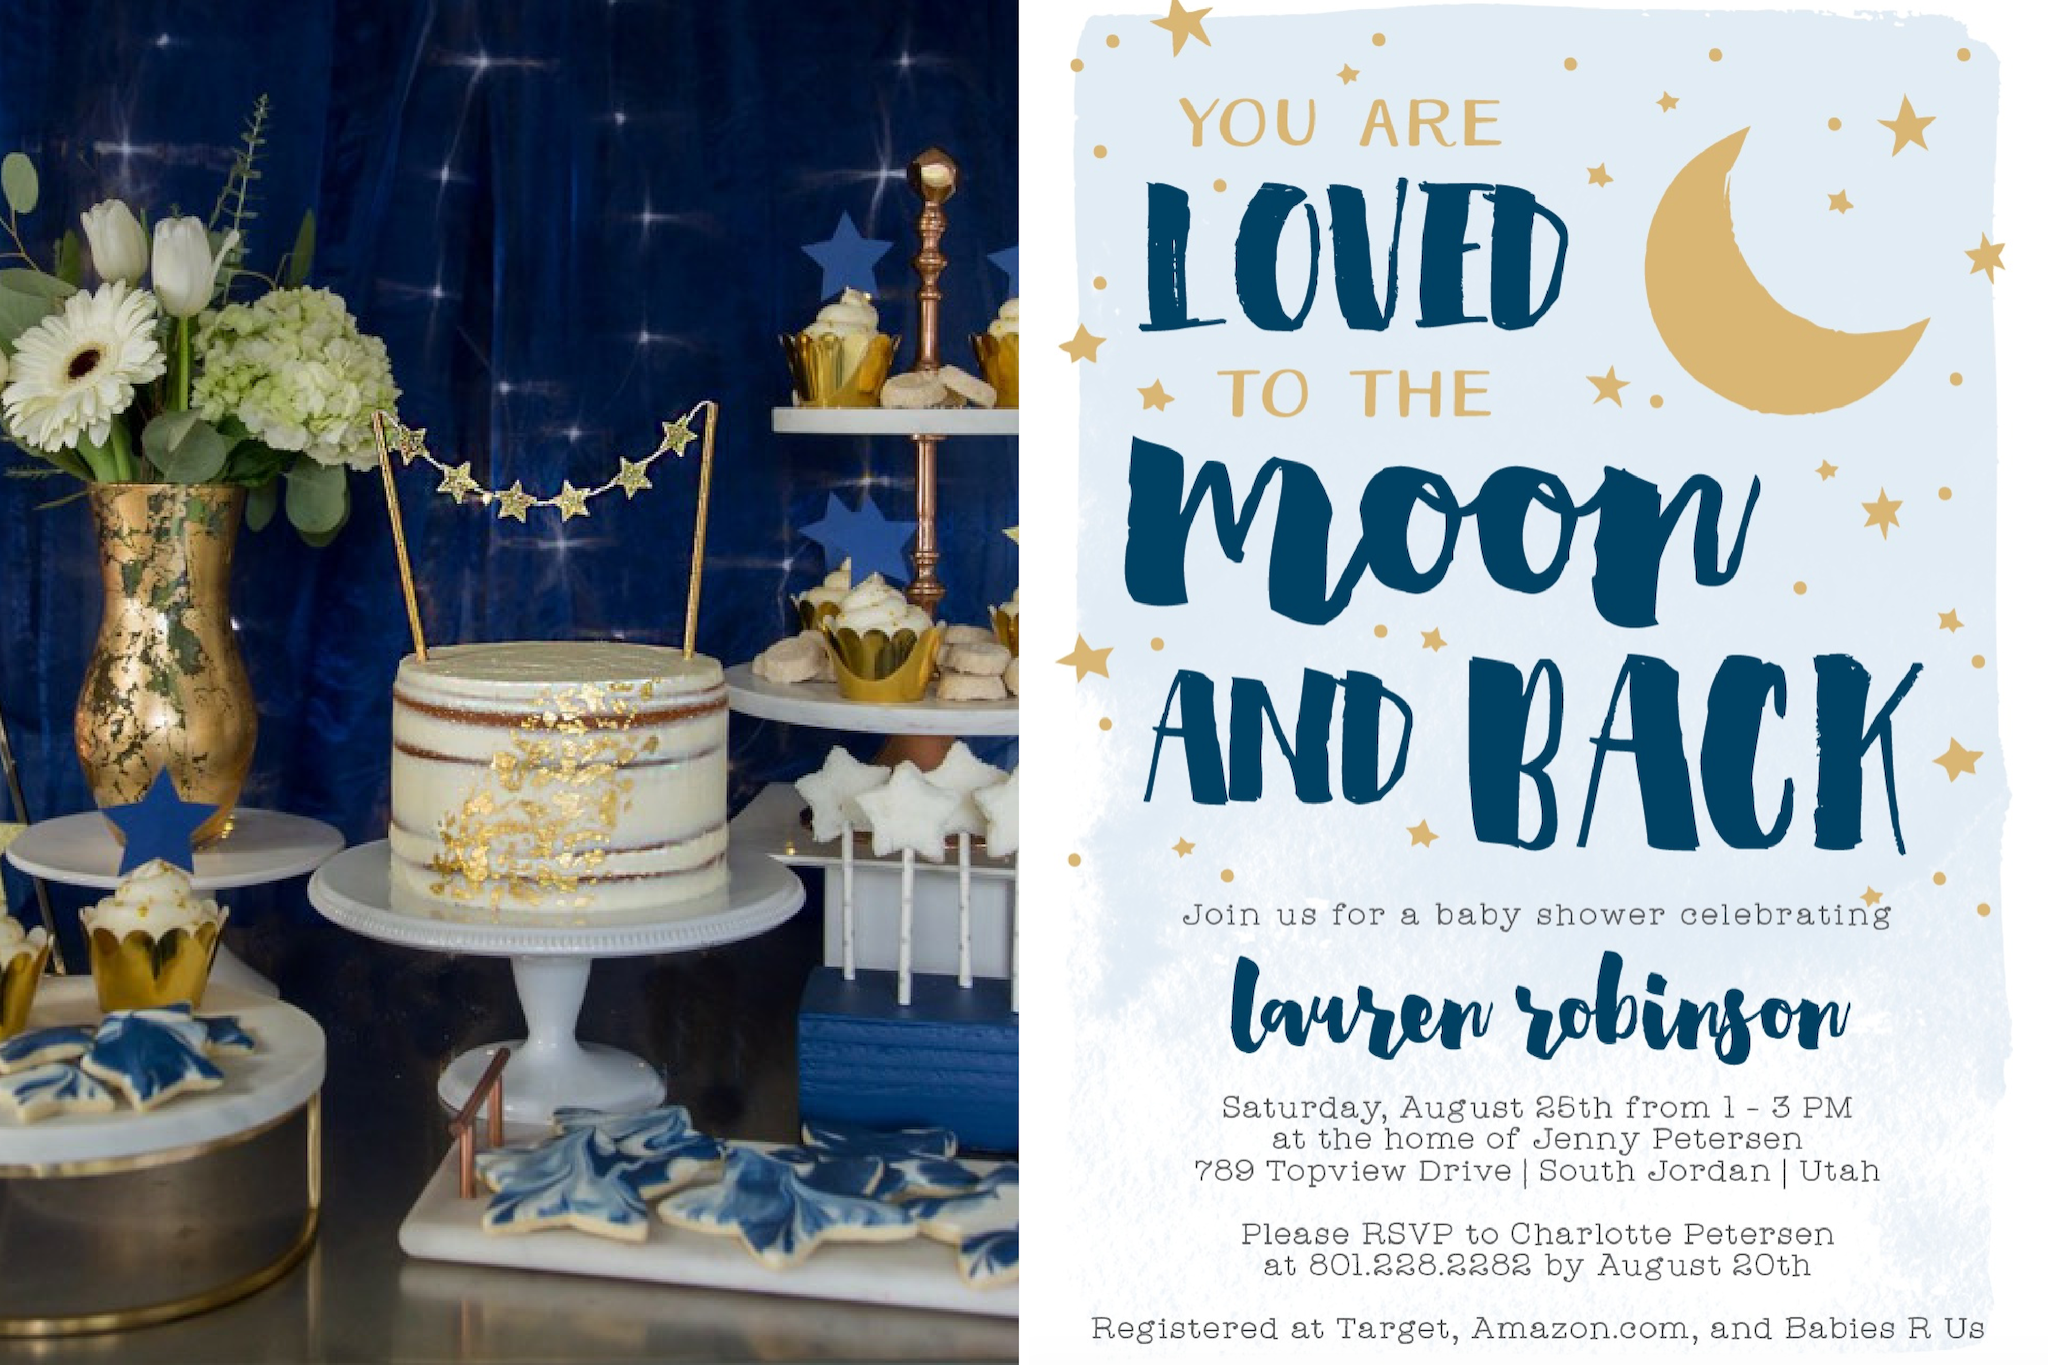 space themed baby shower invitation with gold cake from Allison Carter Celebrates